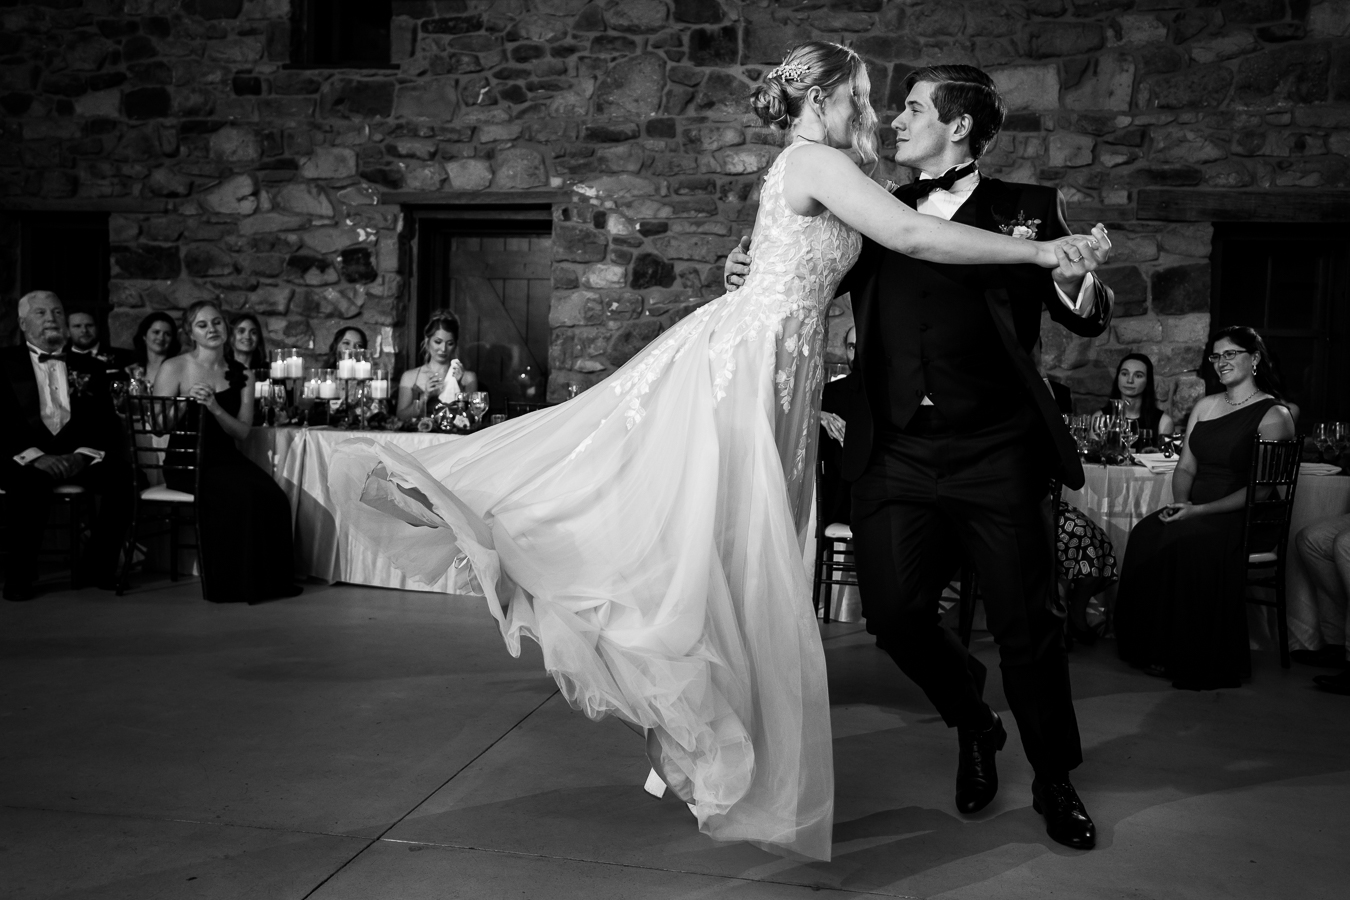 Elizabeth Furnace Wedding photographer, lisa rhinehart, captures this black and white candid moment between the bride and groom as dance their first dance and the bride is spun around on her toe to look like she is flying 